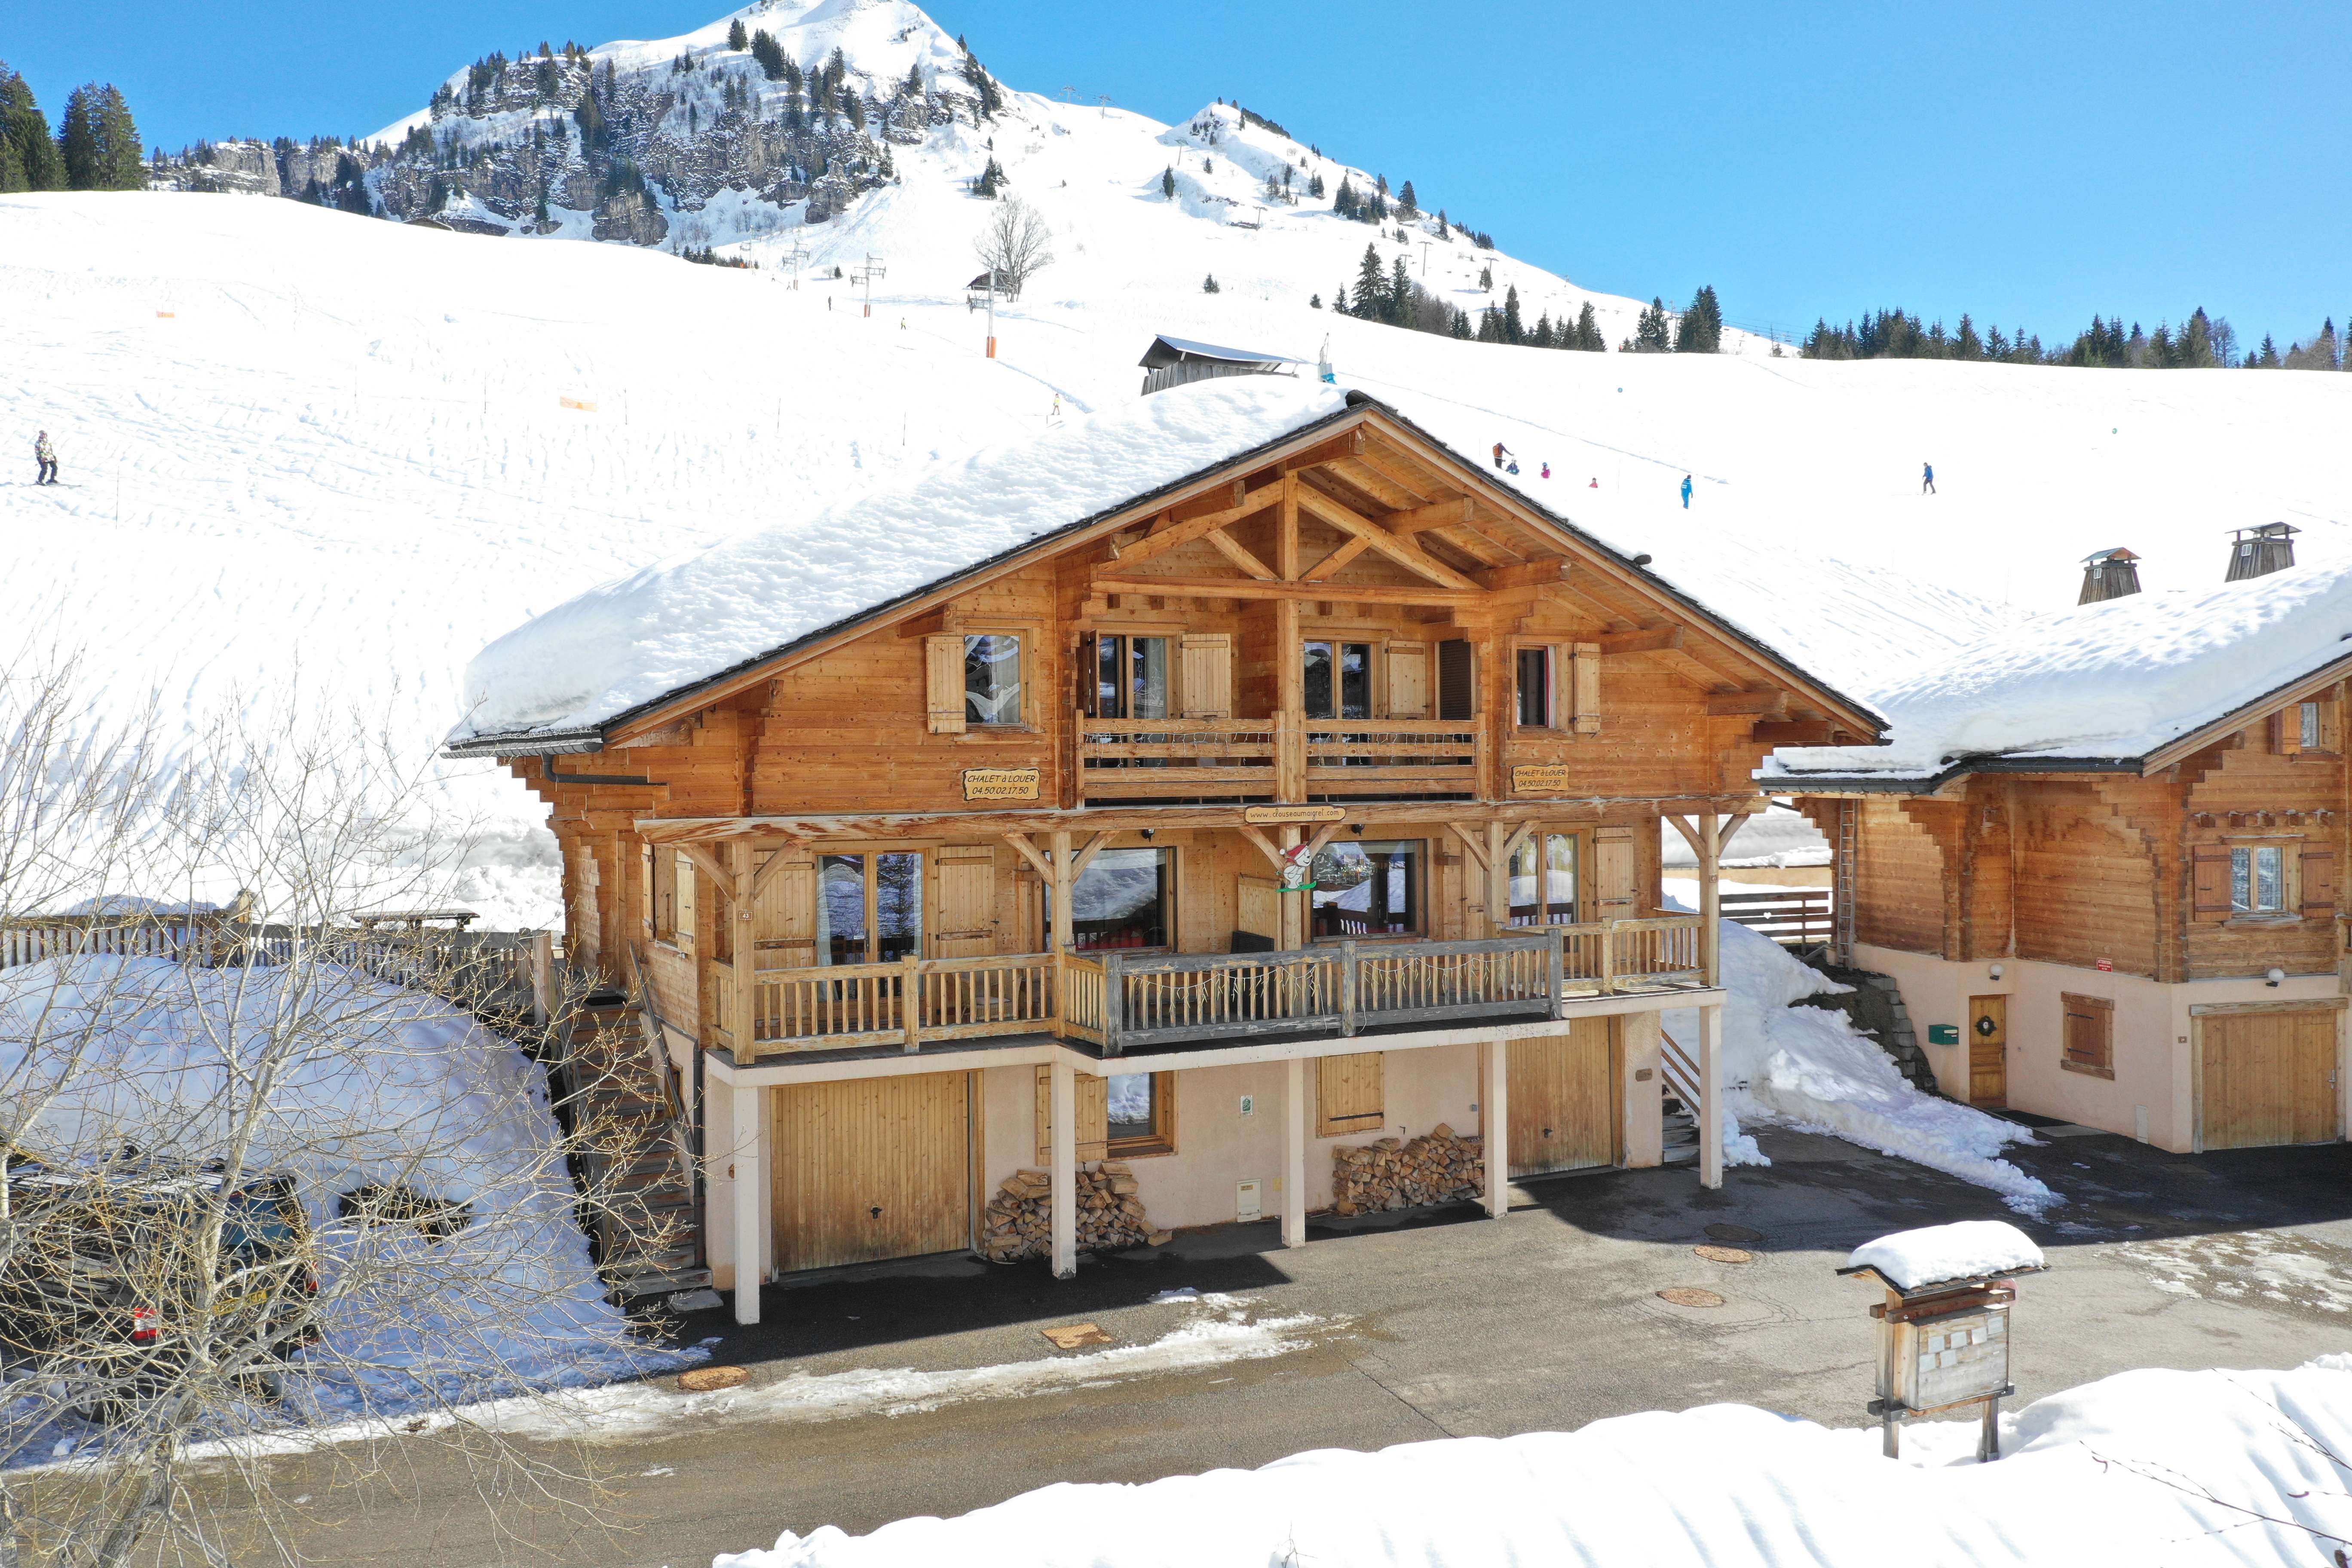 Le Grand Bornand accommodation chalets for rent in Le Grand Bornand apartments to rent in Le Grand Bornand holiday homes to rent in Le Grand Bornand